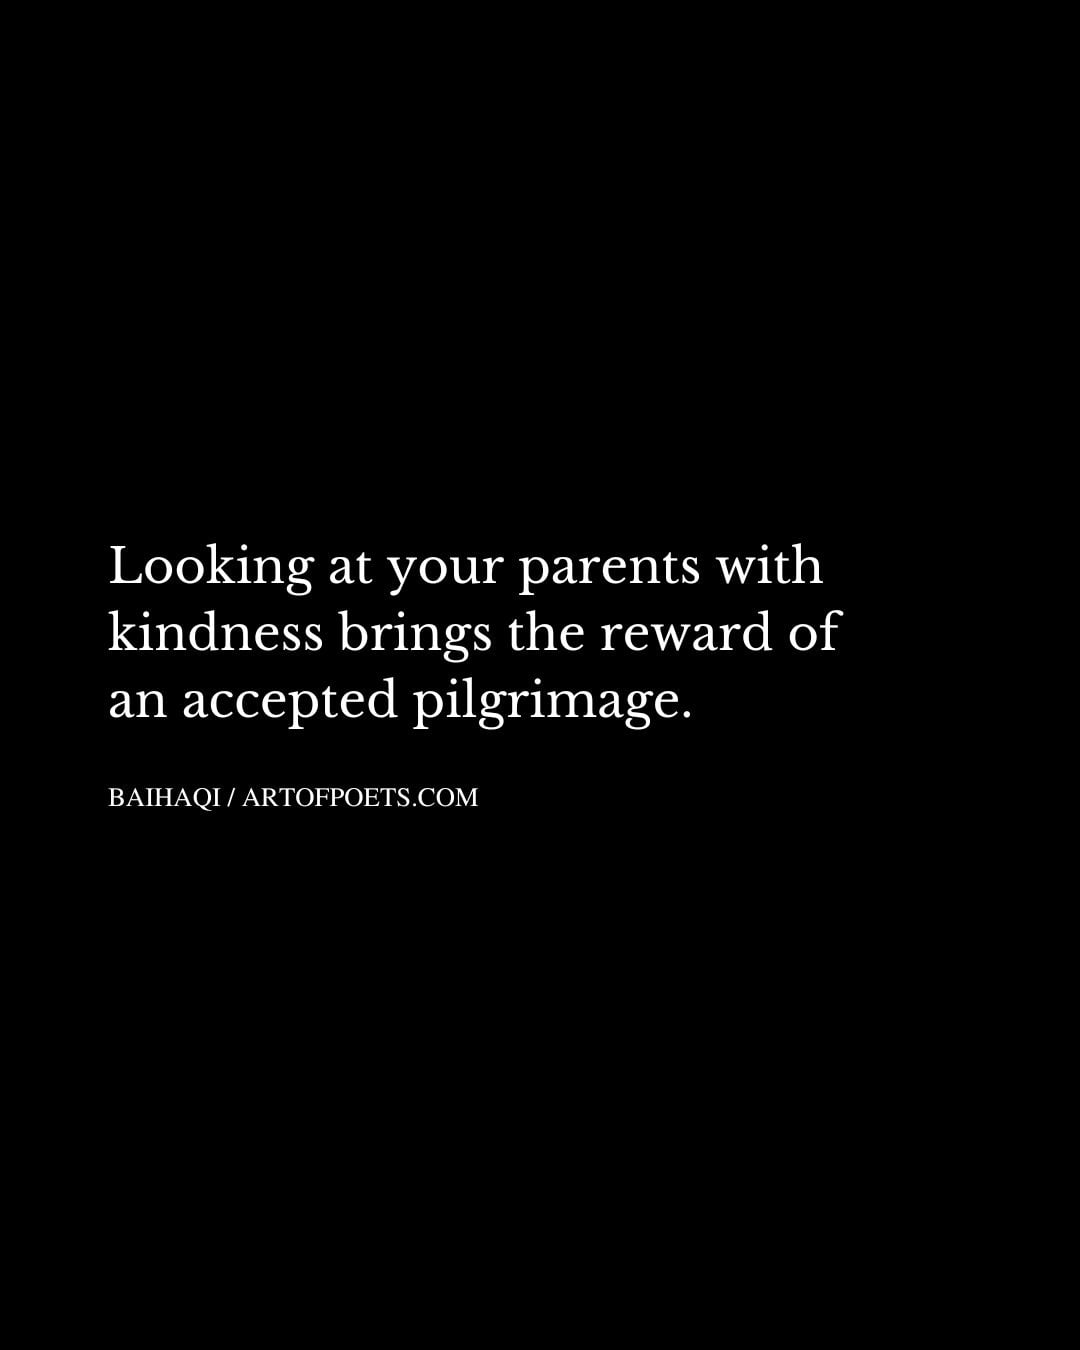 Looking at your parents with kindness brings the reward of an accepted pilgrimage